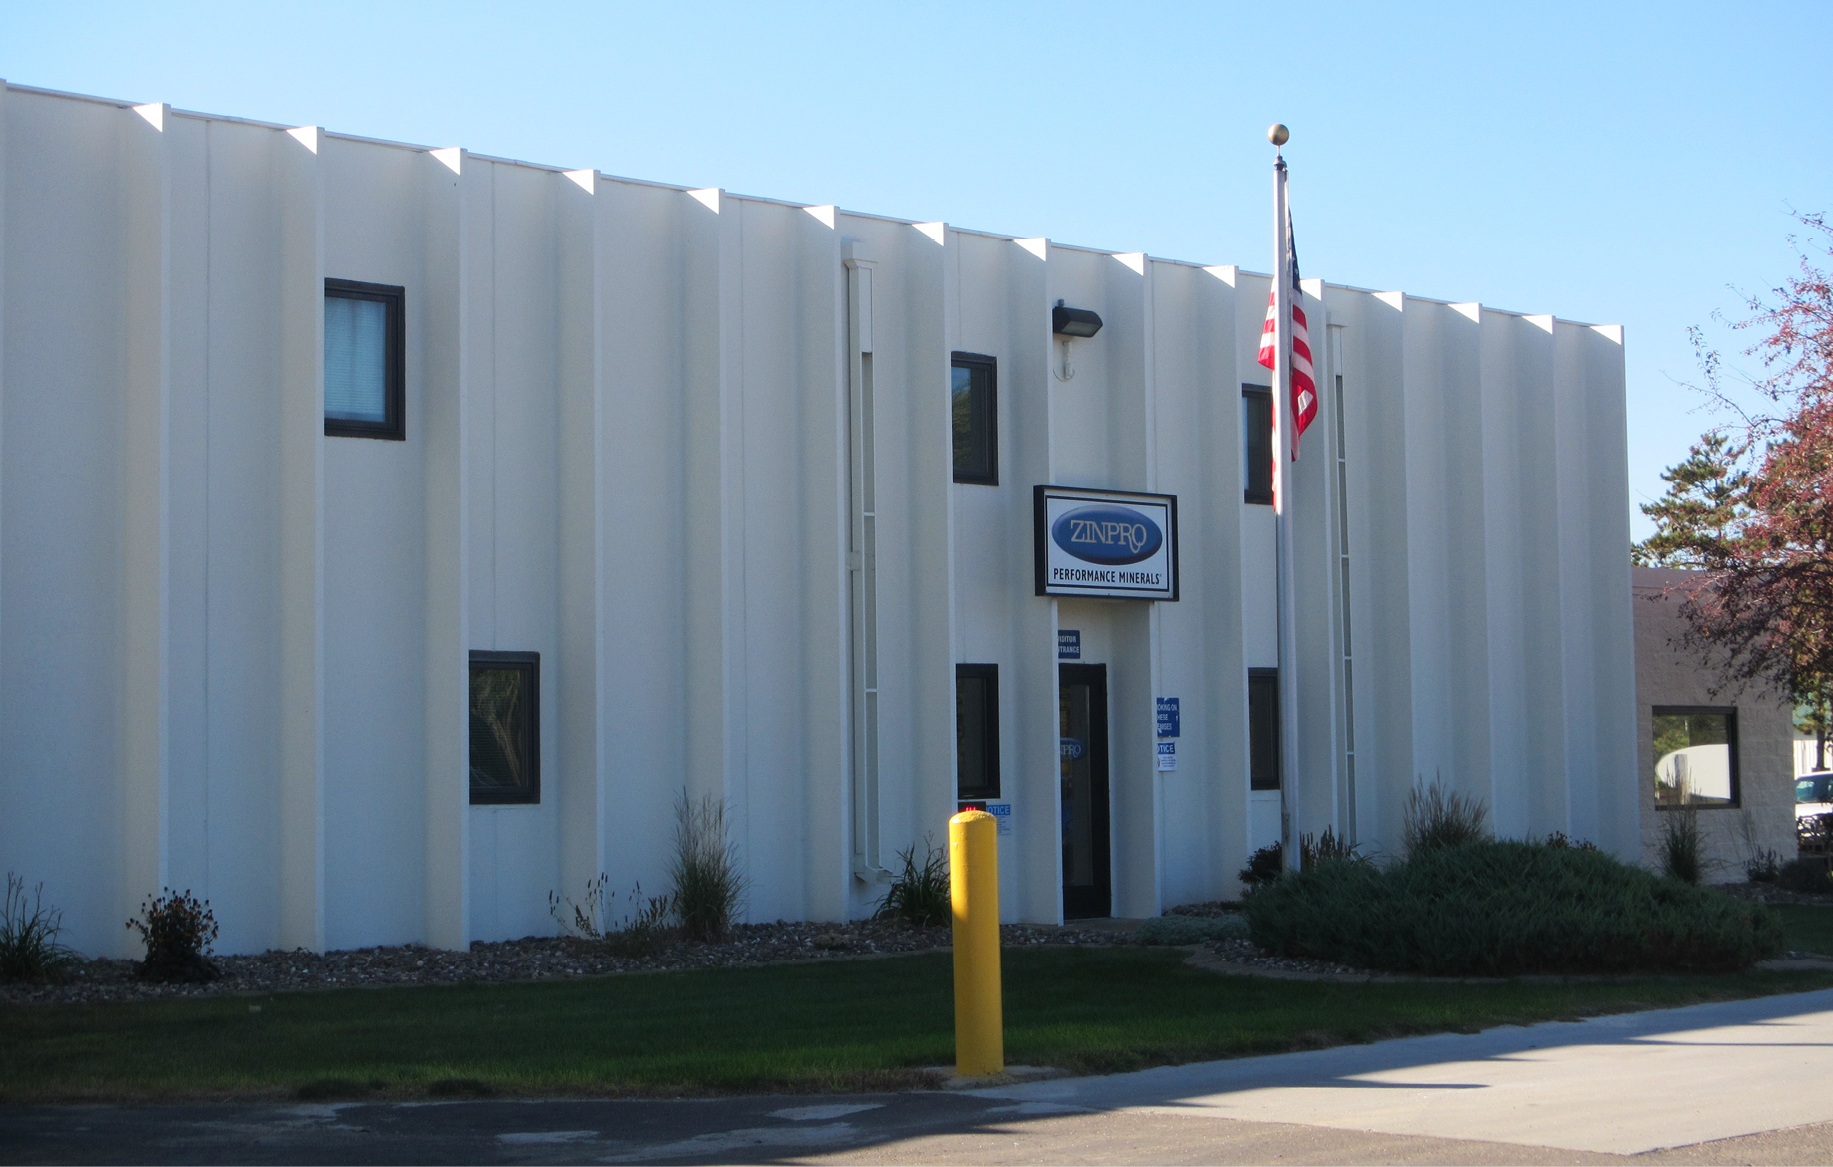 Zinpro manufacturing facility in North Branch, Minnesota